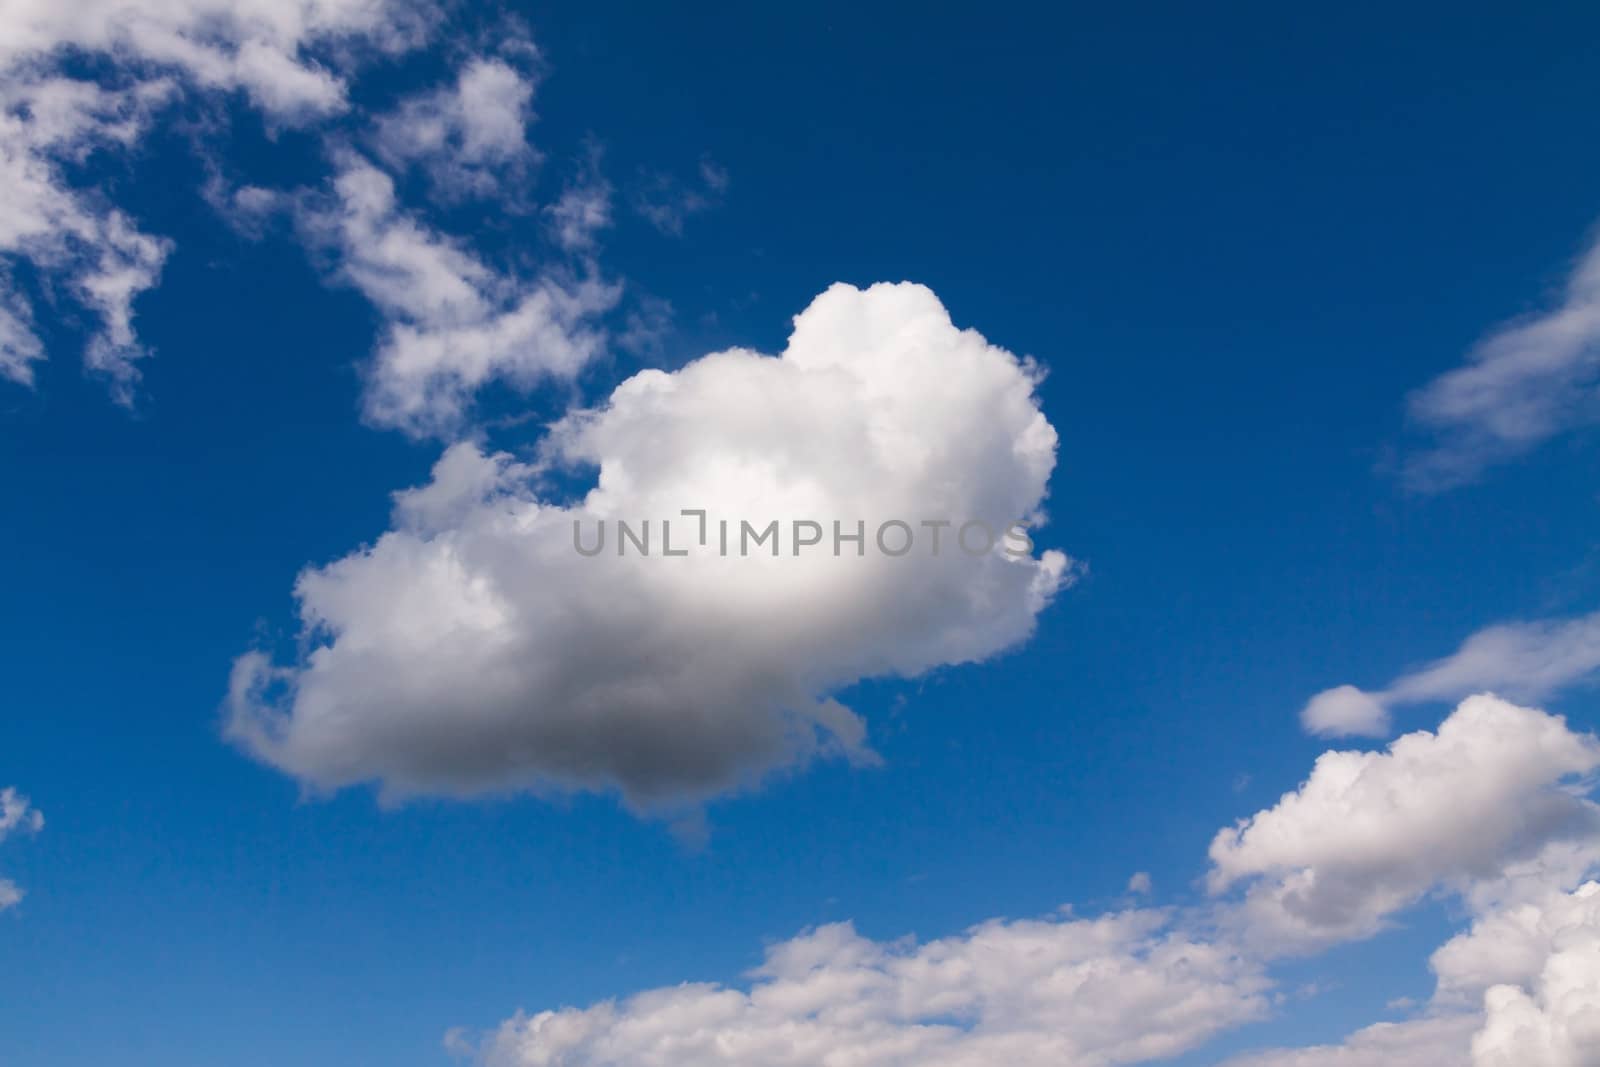 Blue summer sky with white clouds